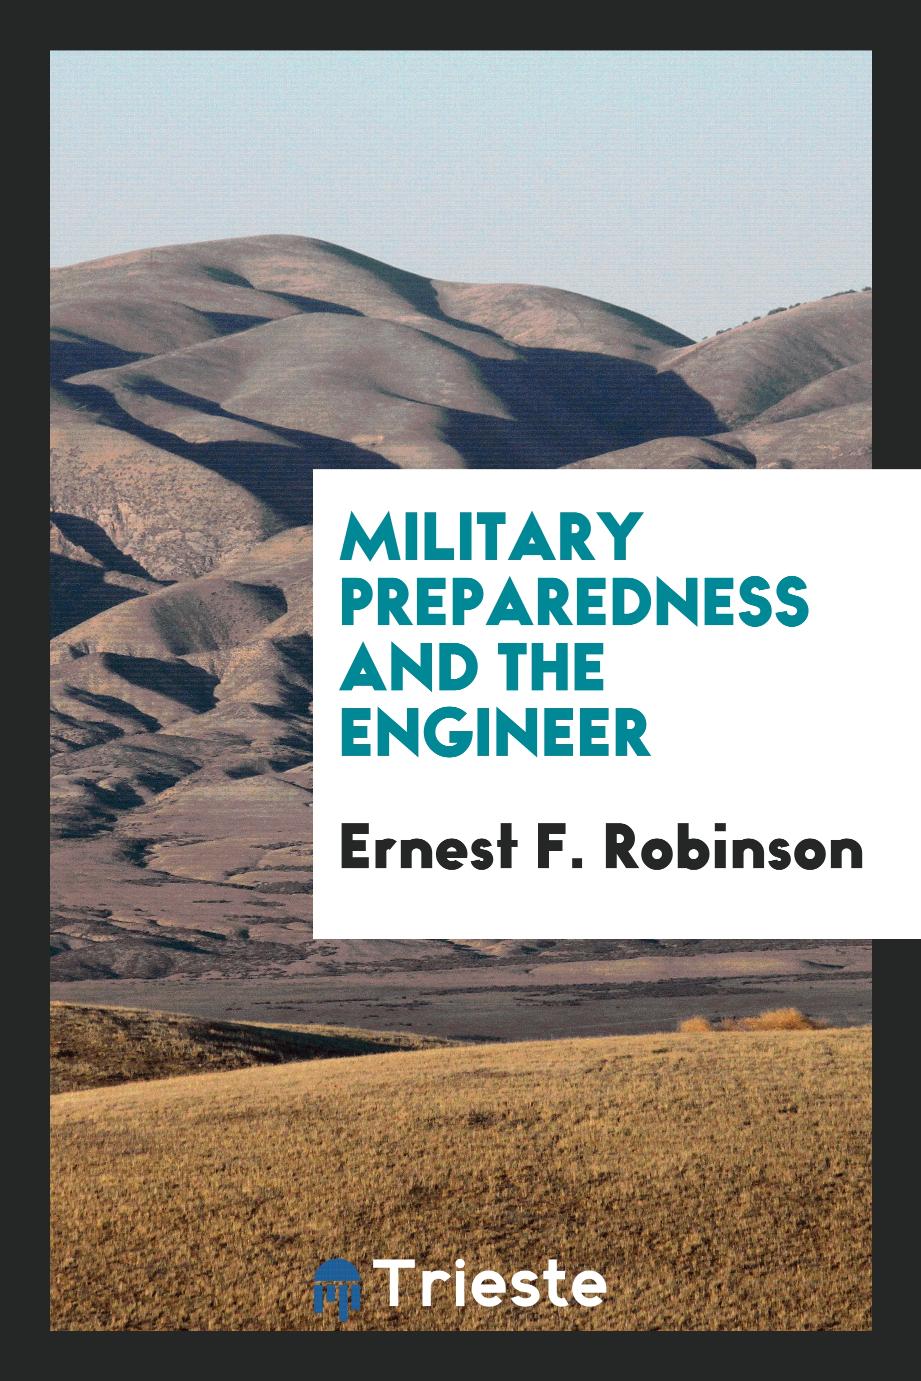 Military preparedness and the engineer